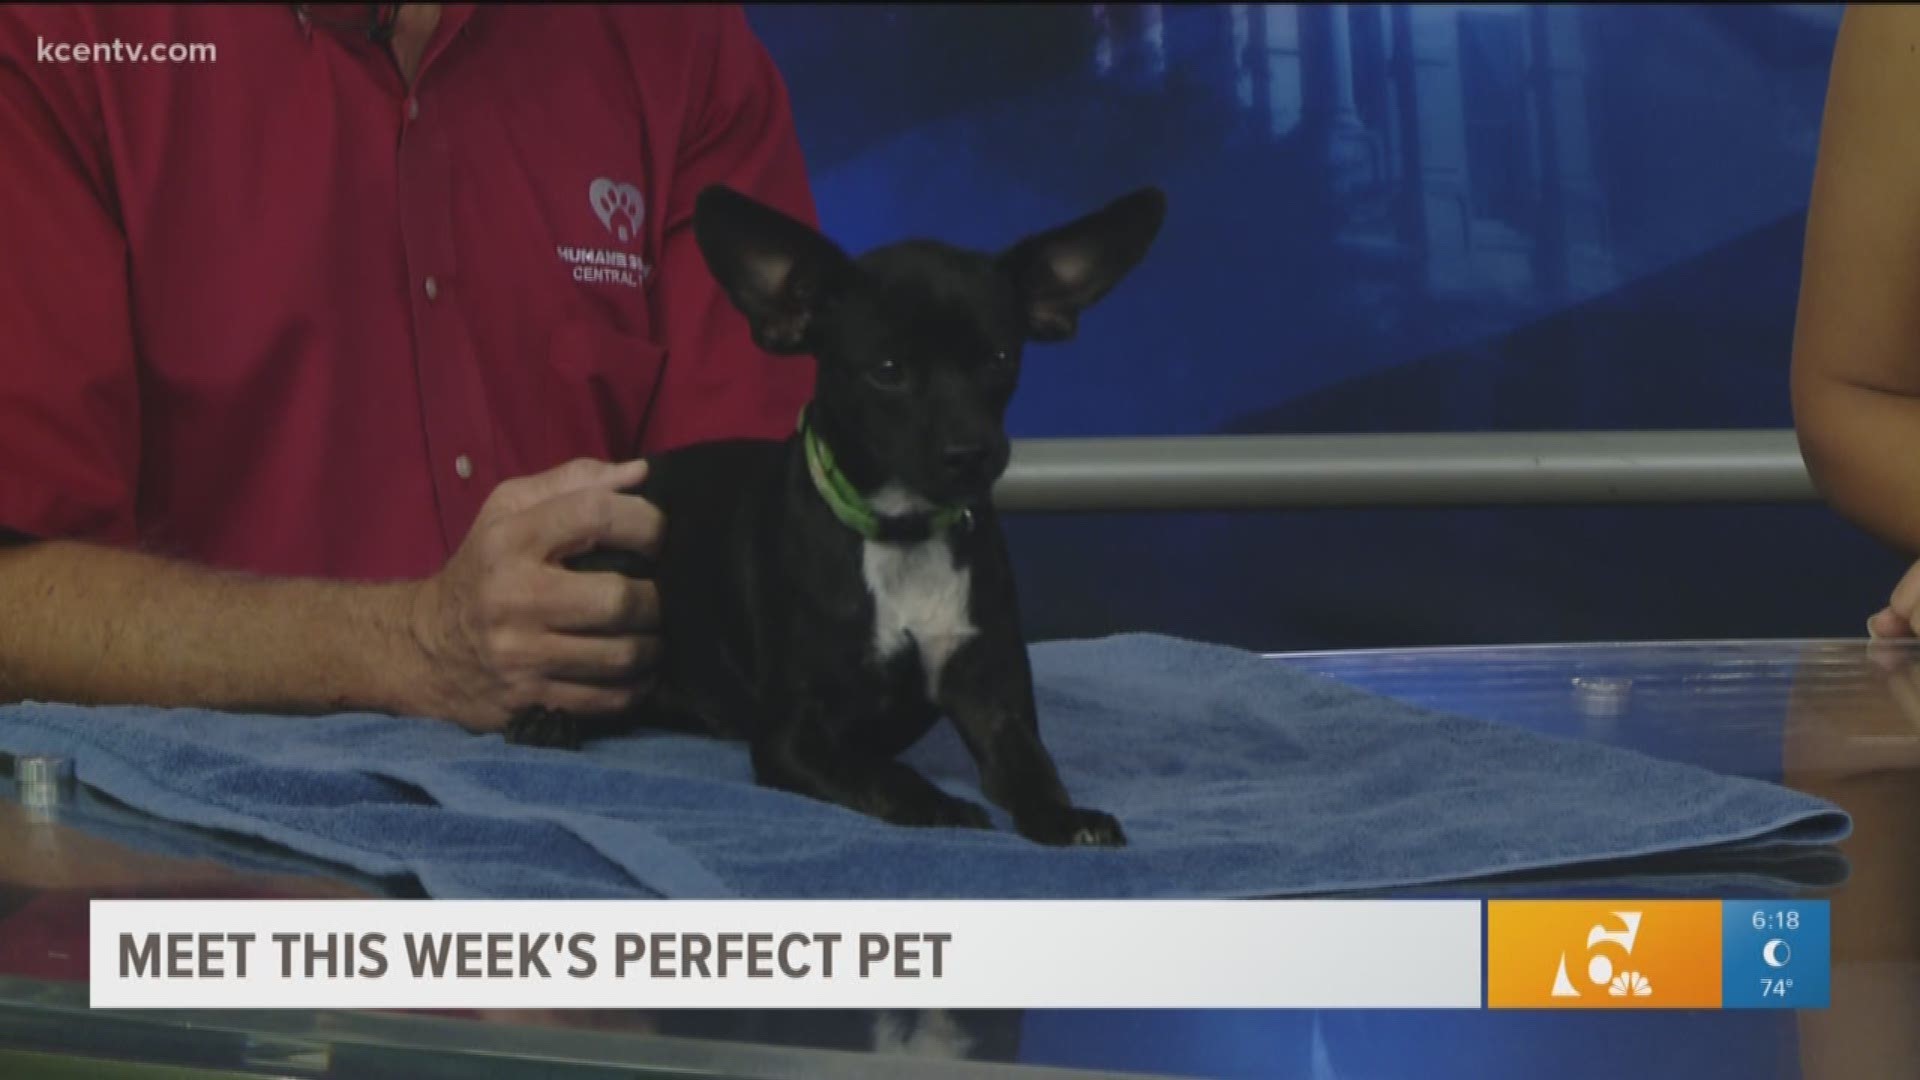 Meet this week's perfect pet Seattle. You can adopt them from the Humane Society of Central Texas.